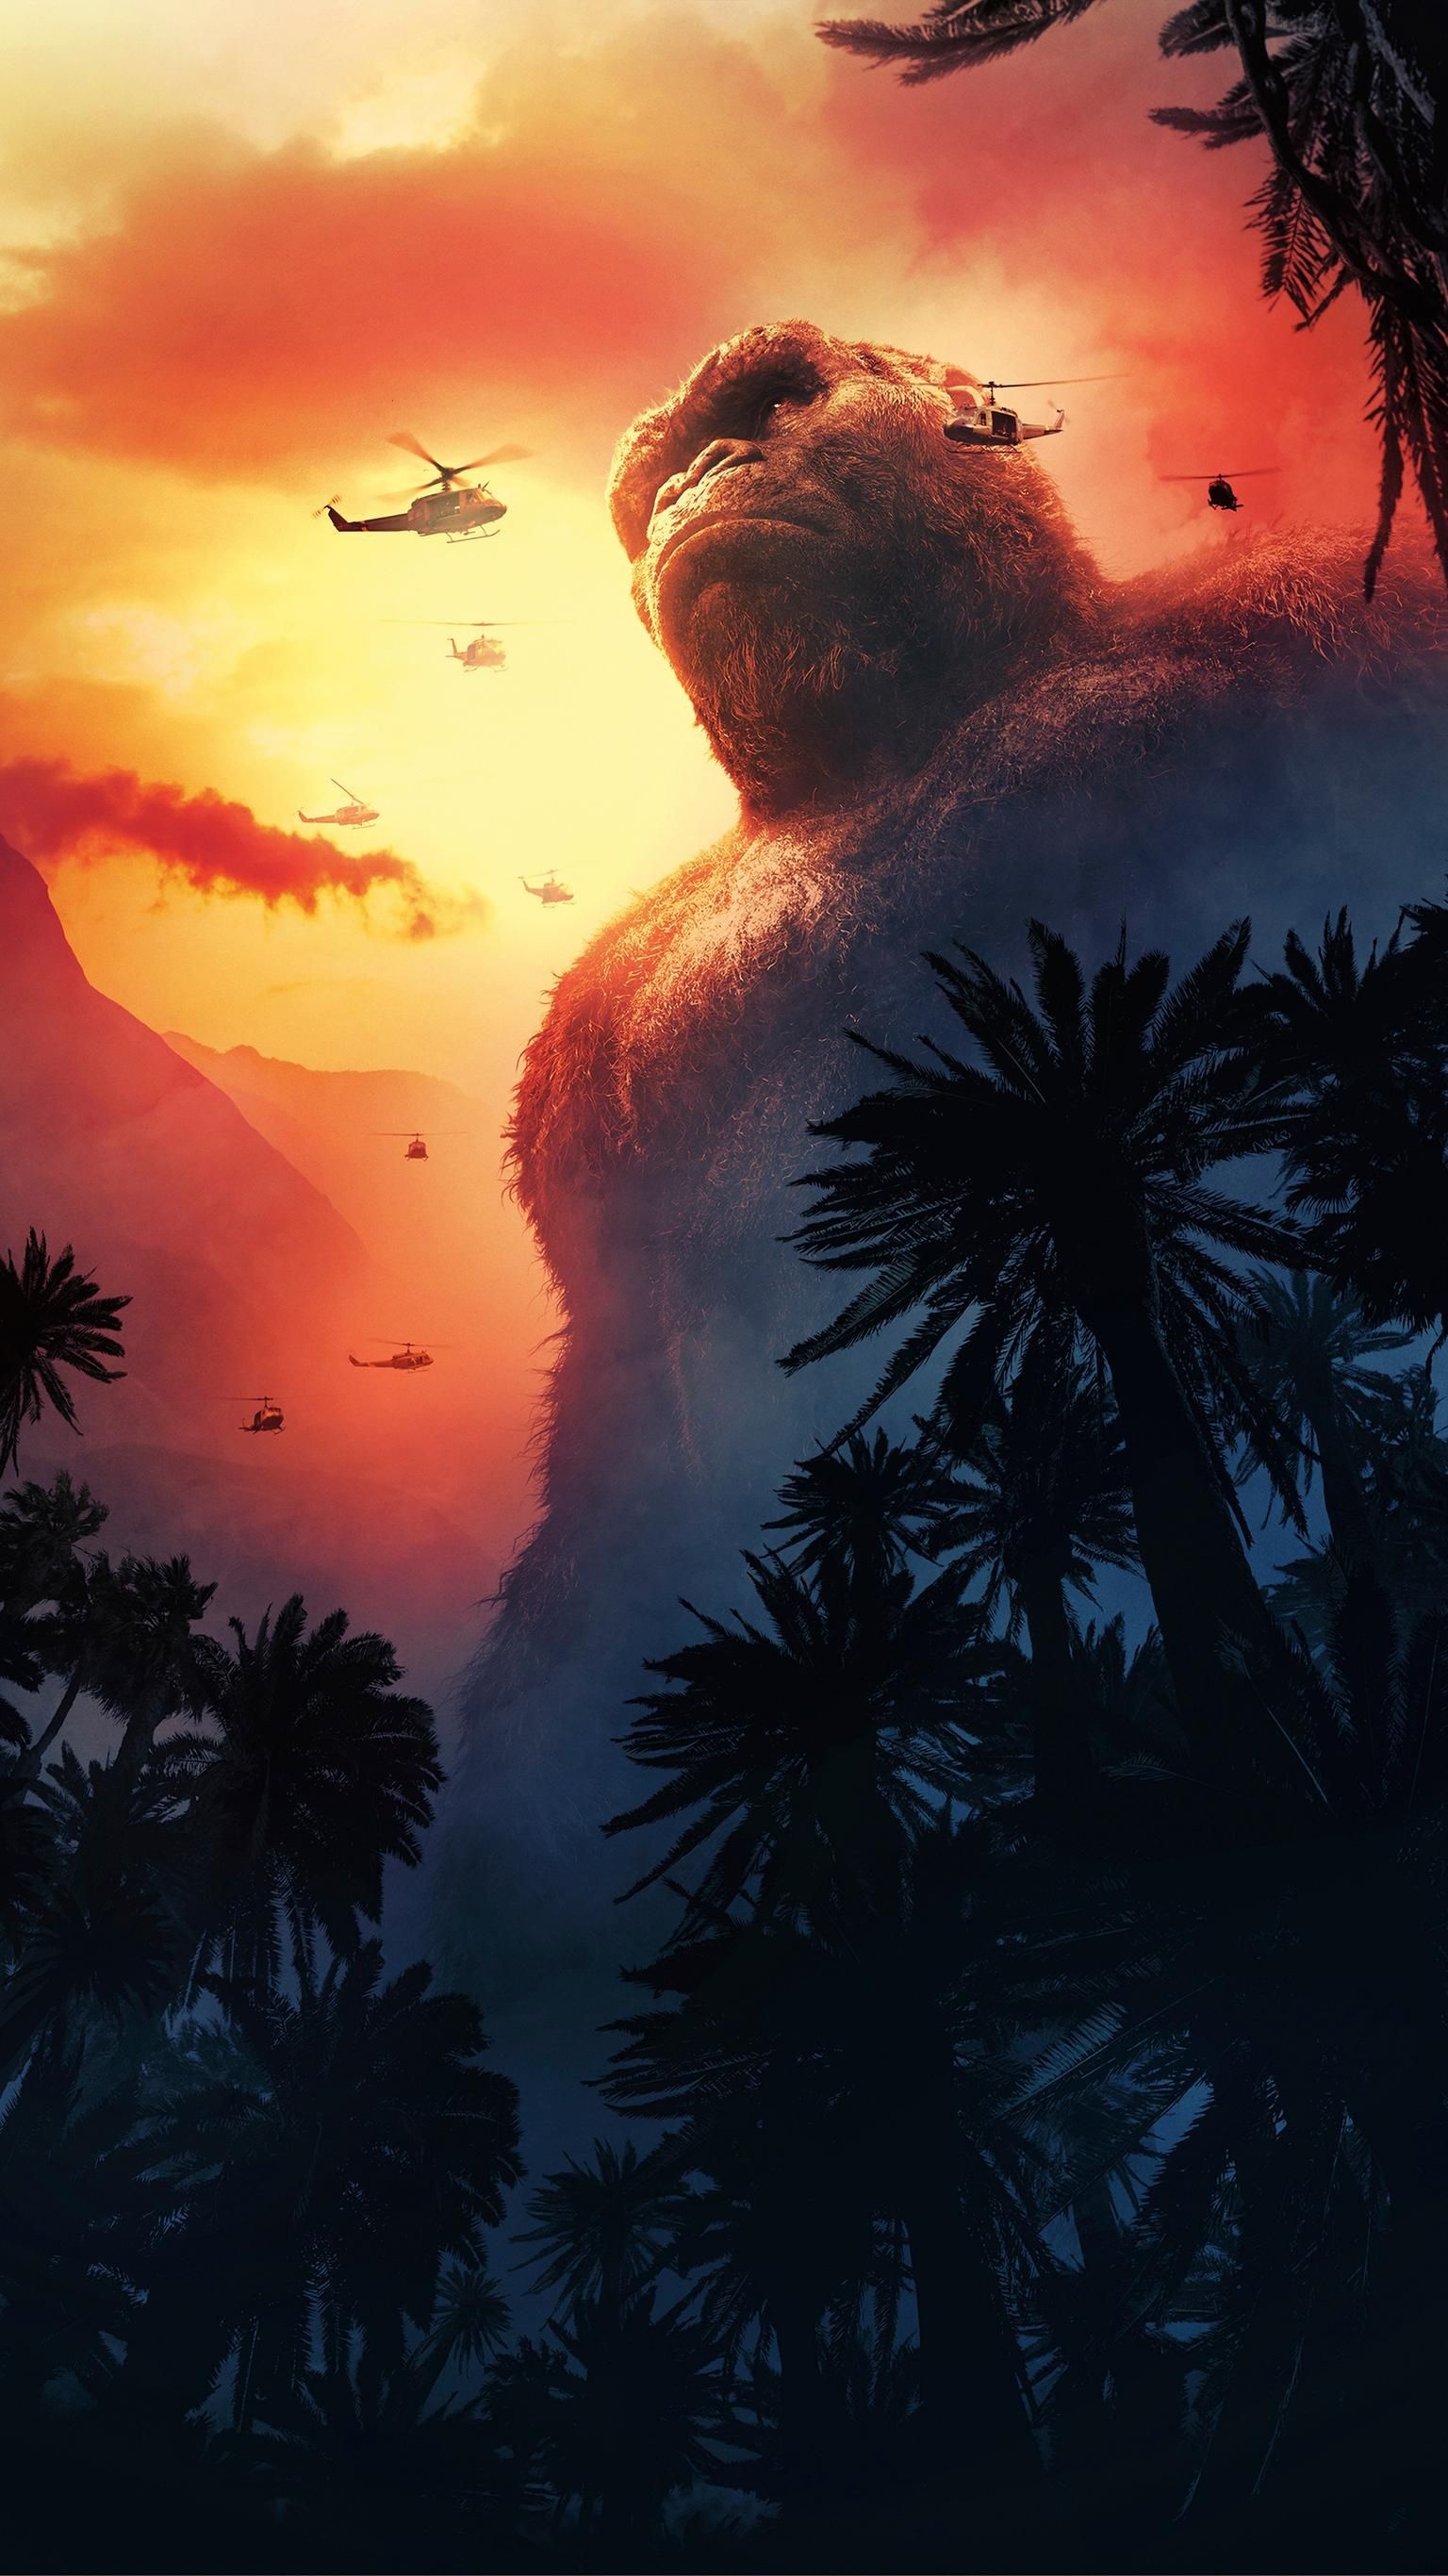 King Kong: Depicted as the protector of the Skull Island, battling other giant monsters to keep it safe. 1540x2740 HD Wallpaper.